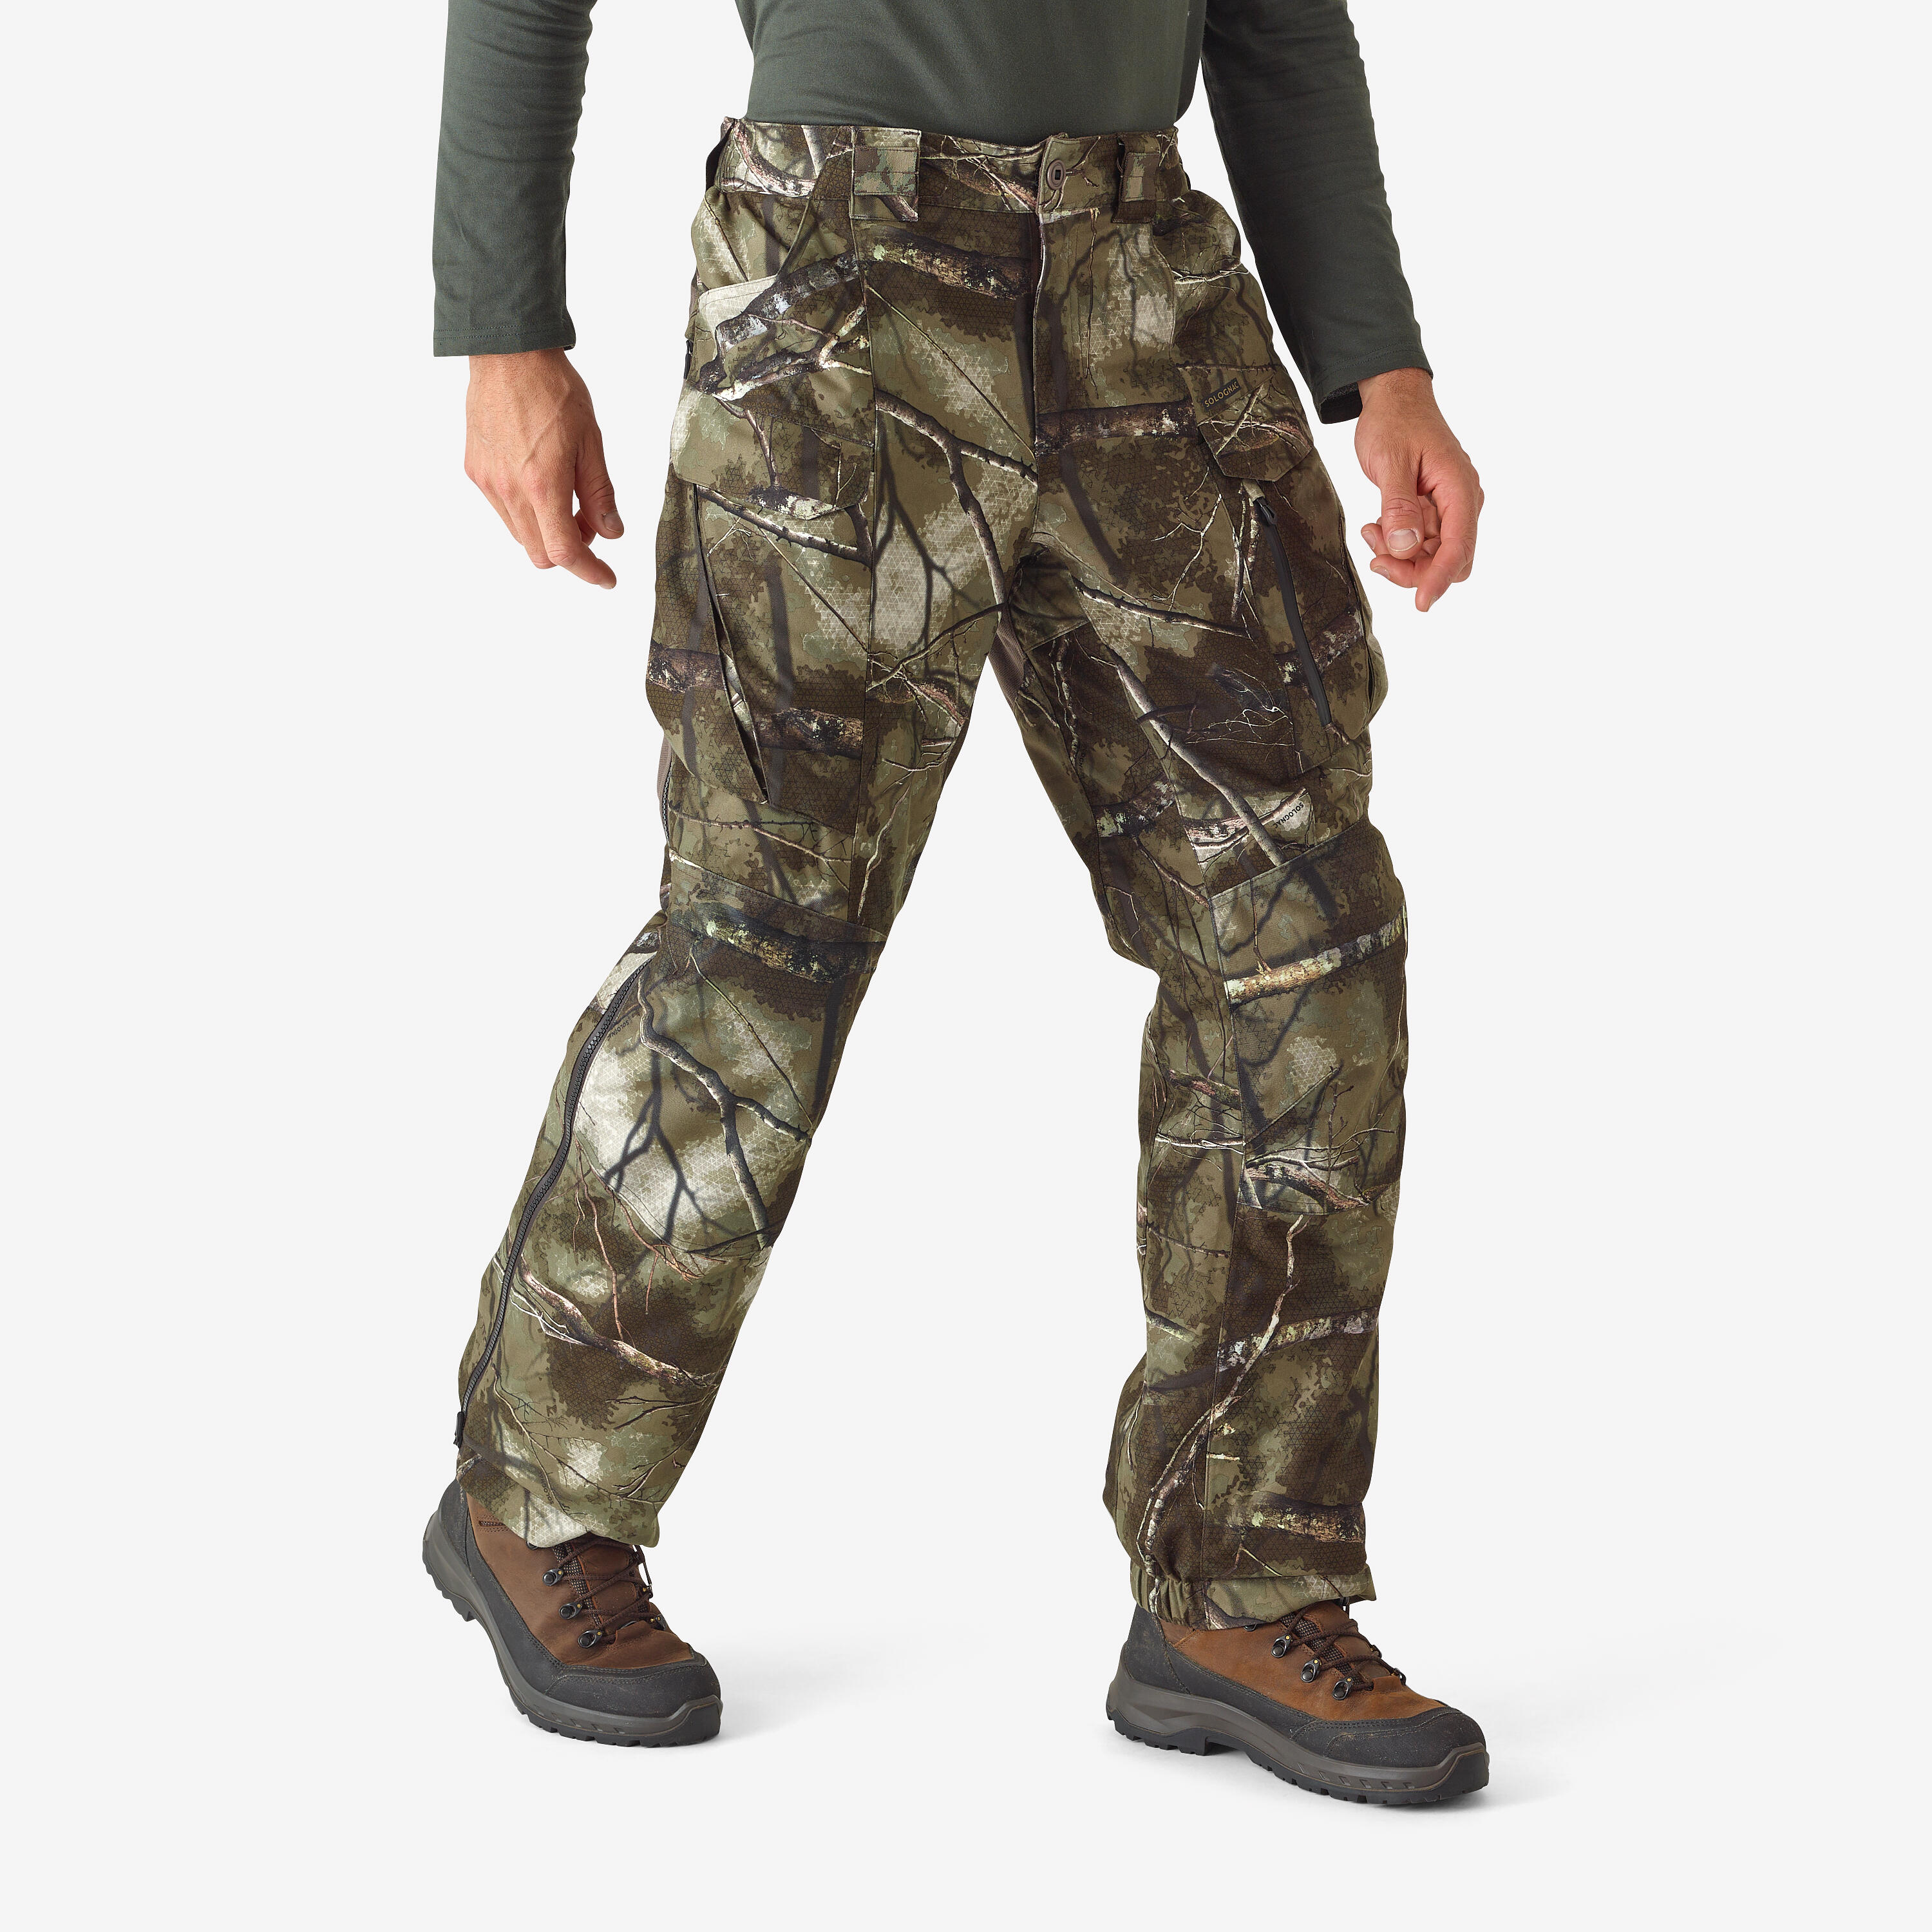 TROUSERS WITH STRAPS WARM WATERPROOF AND SILENT 900 TREEMETIC CAMOUFLAGE 5/11